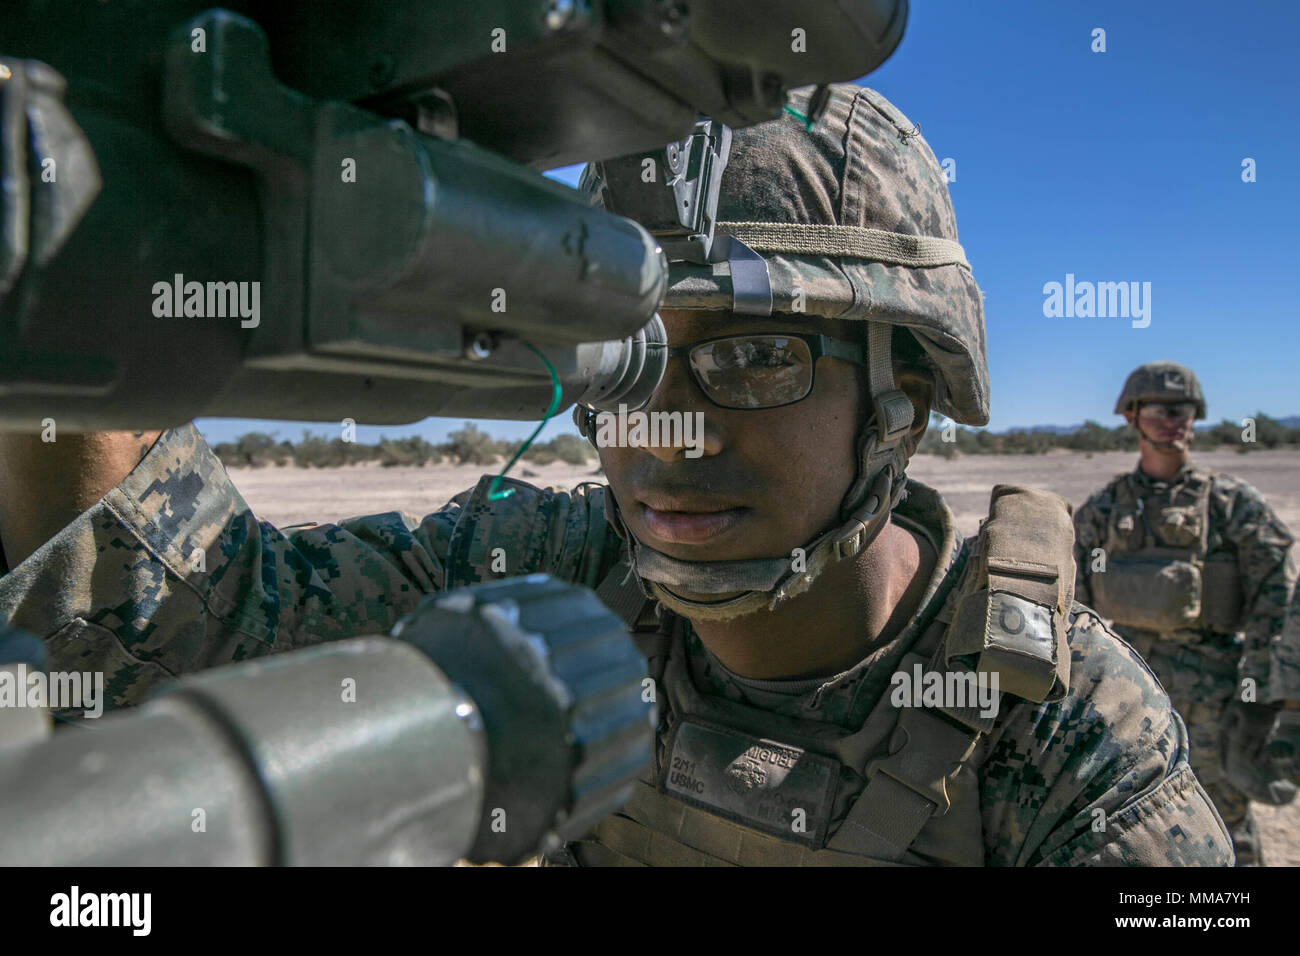 U.S. Marine Corps Lance Cpl. Malcom Miguel, a field artillery Marine with Echo Battery, 2nd Battalion, 11th Marine Regiment, prepares to fire a M777 towed 155 mm howitzer during Weapons and Tactics Instructors Course (WTI) 1-18 at Yuma, Ariz., on Sept. 30, 2017. WTI is a seven week training event hosted by Marine Aviation and Weapons Tactics Squadron One (MAWTS-1) cadre which emphasizes operational integration of the six functions of Marine Corps Aviation in support of a Marine Air Ground Task Force. MAWTS-1 provides standardized advanced tactical training and certification of unit instructor  Stock Photo